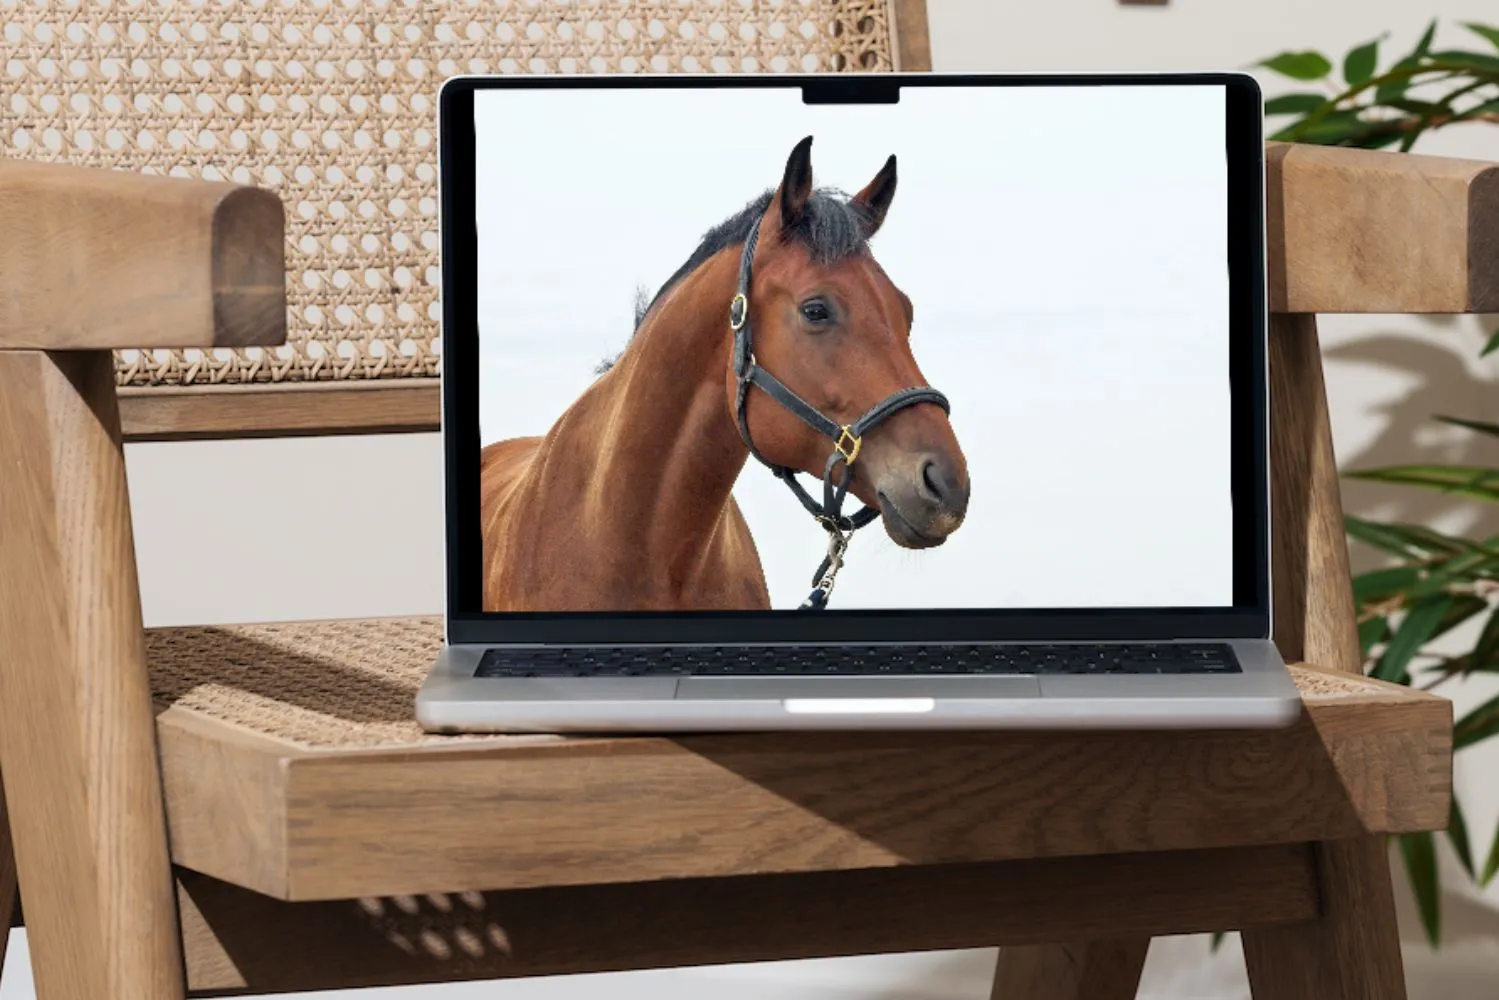 Virtual Evaluations A horse head on a computer